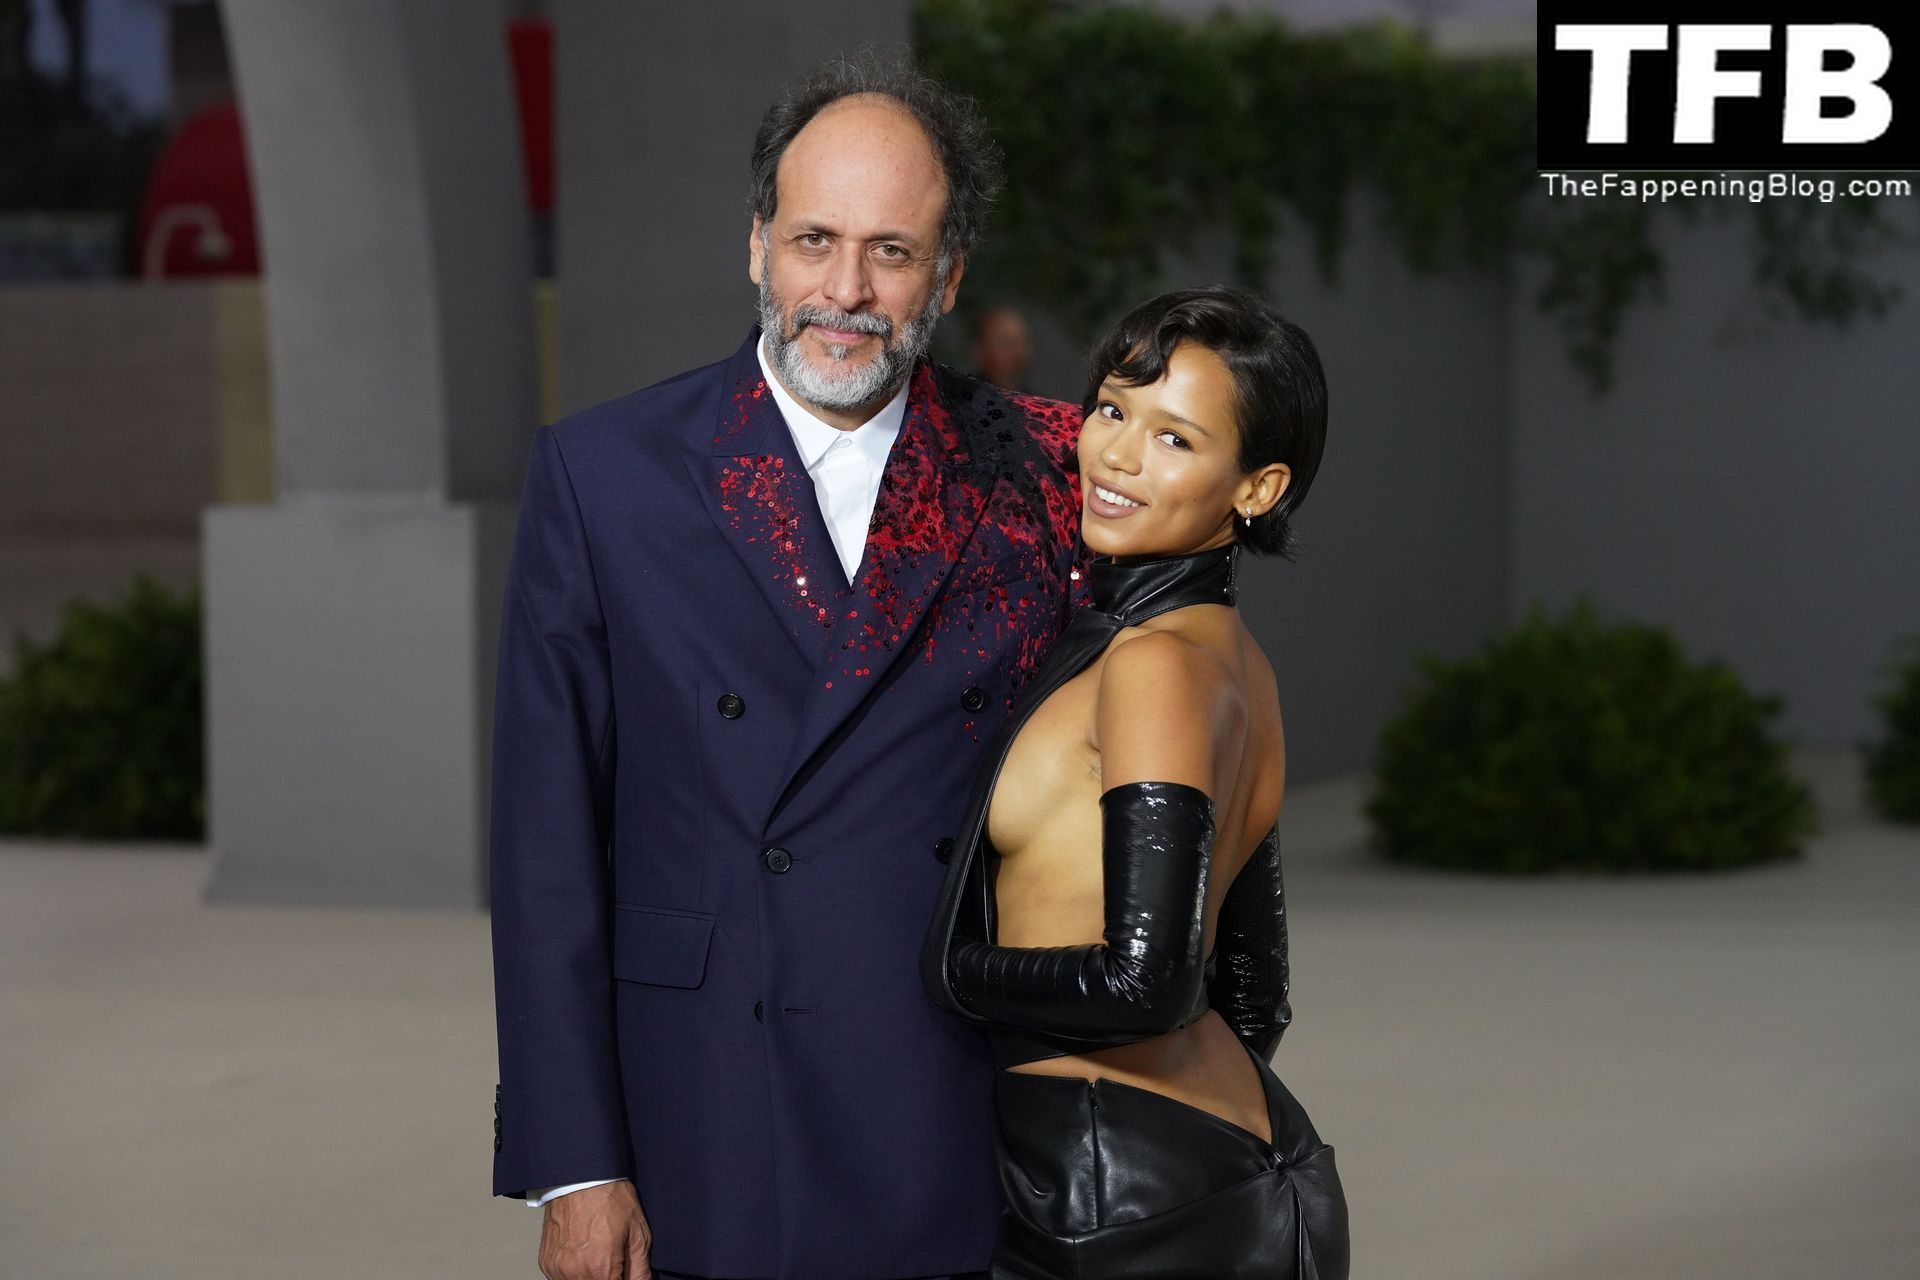 Taylor Russell Sexy Tits The Fappening Blog 17 - Taylor Russell Shows Off Her Sideboob at the 2nd Annual Academy Museum Gala in LA (21 Photos)